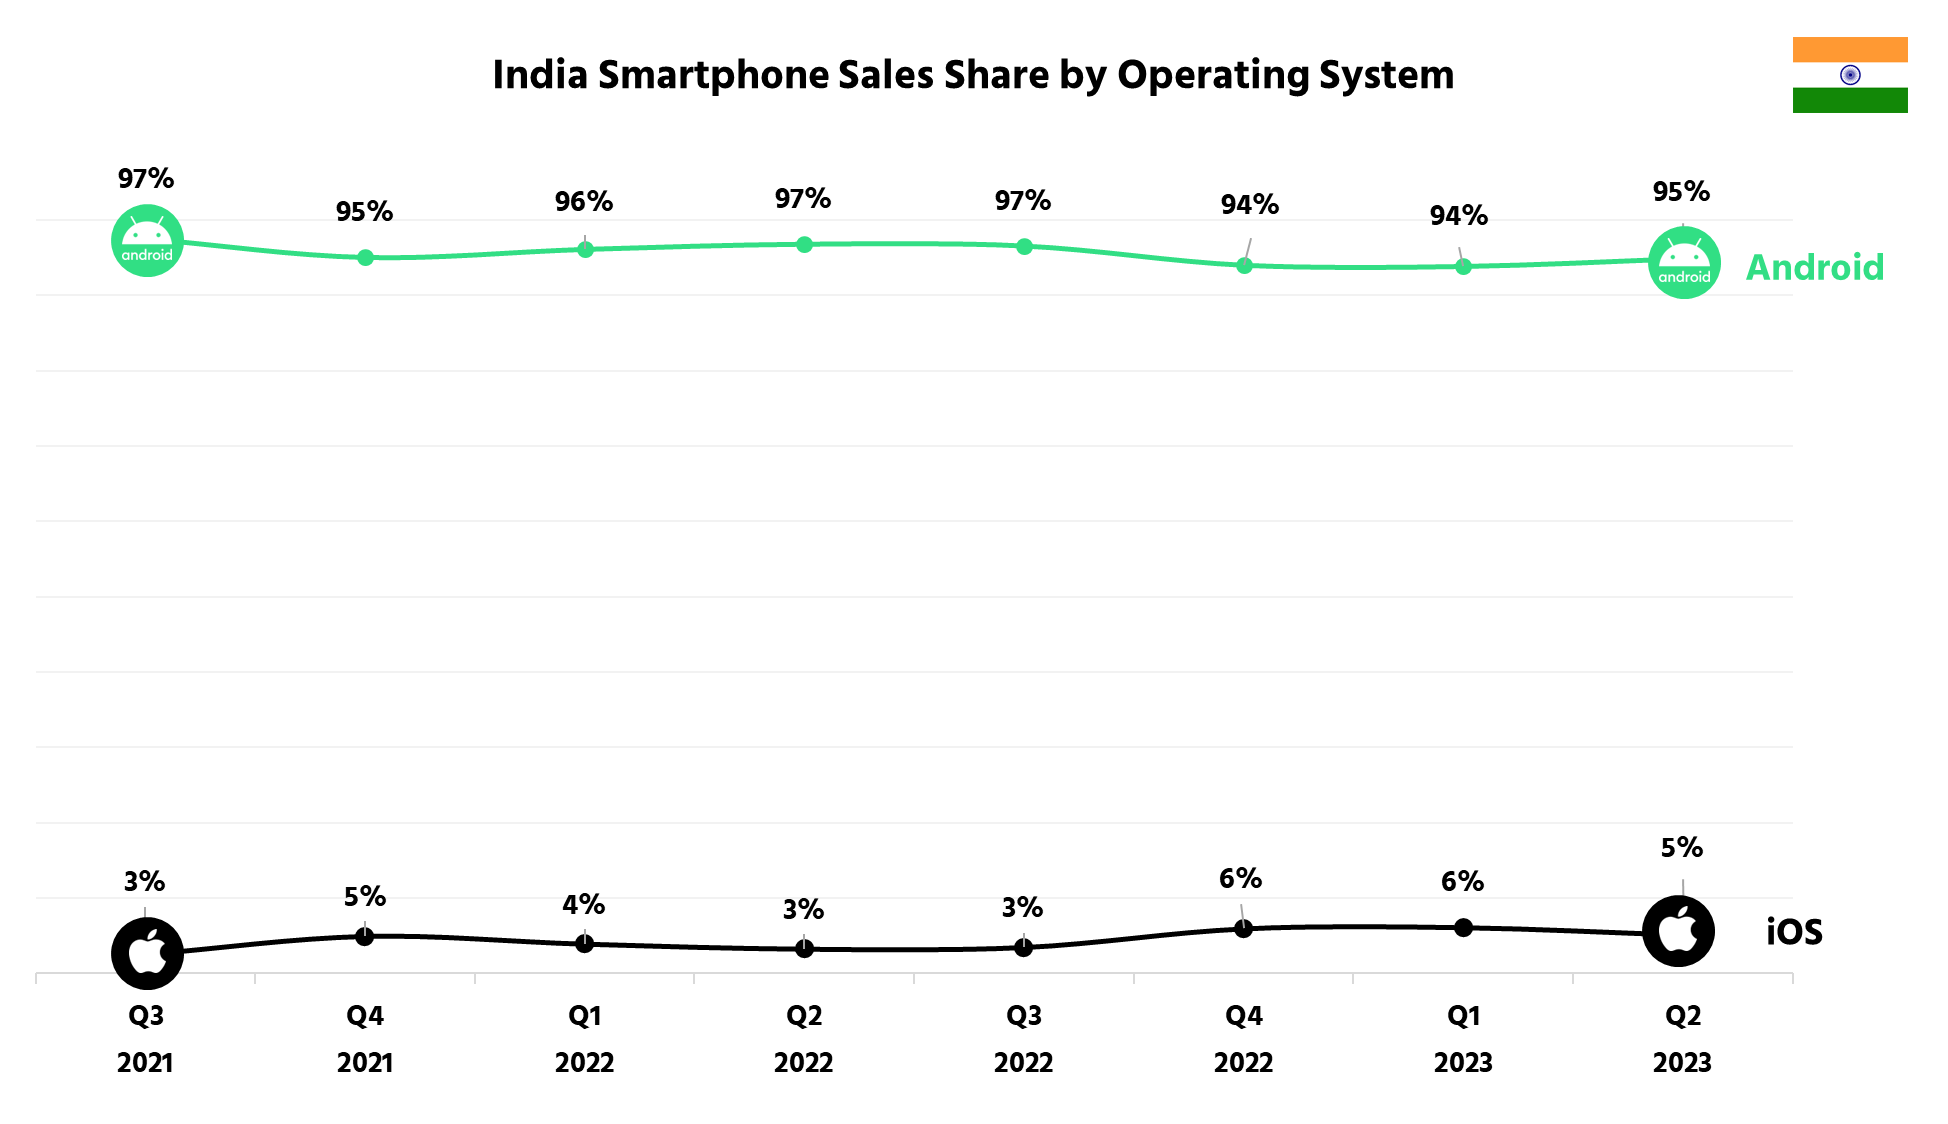 A chart showing the smartphone OS sales share in Q2 2023 for India